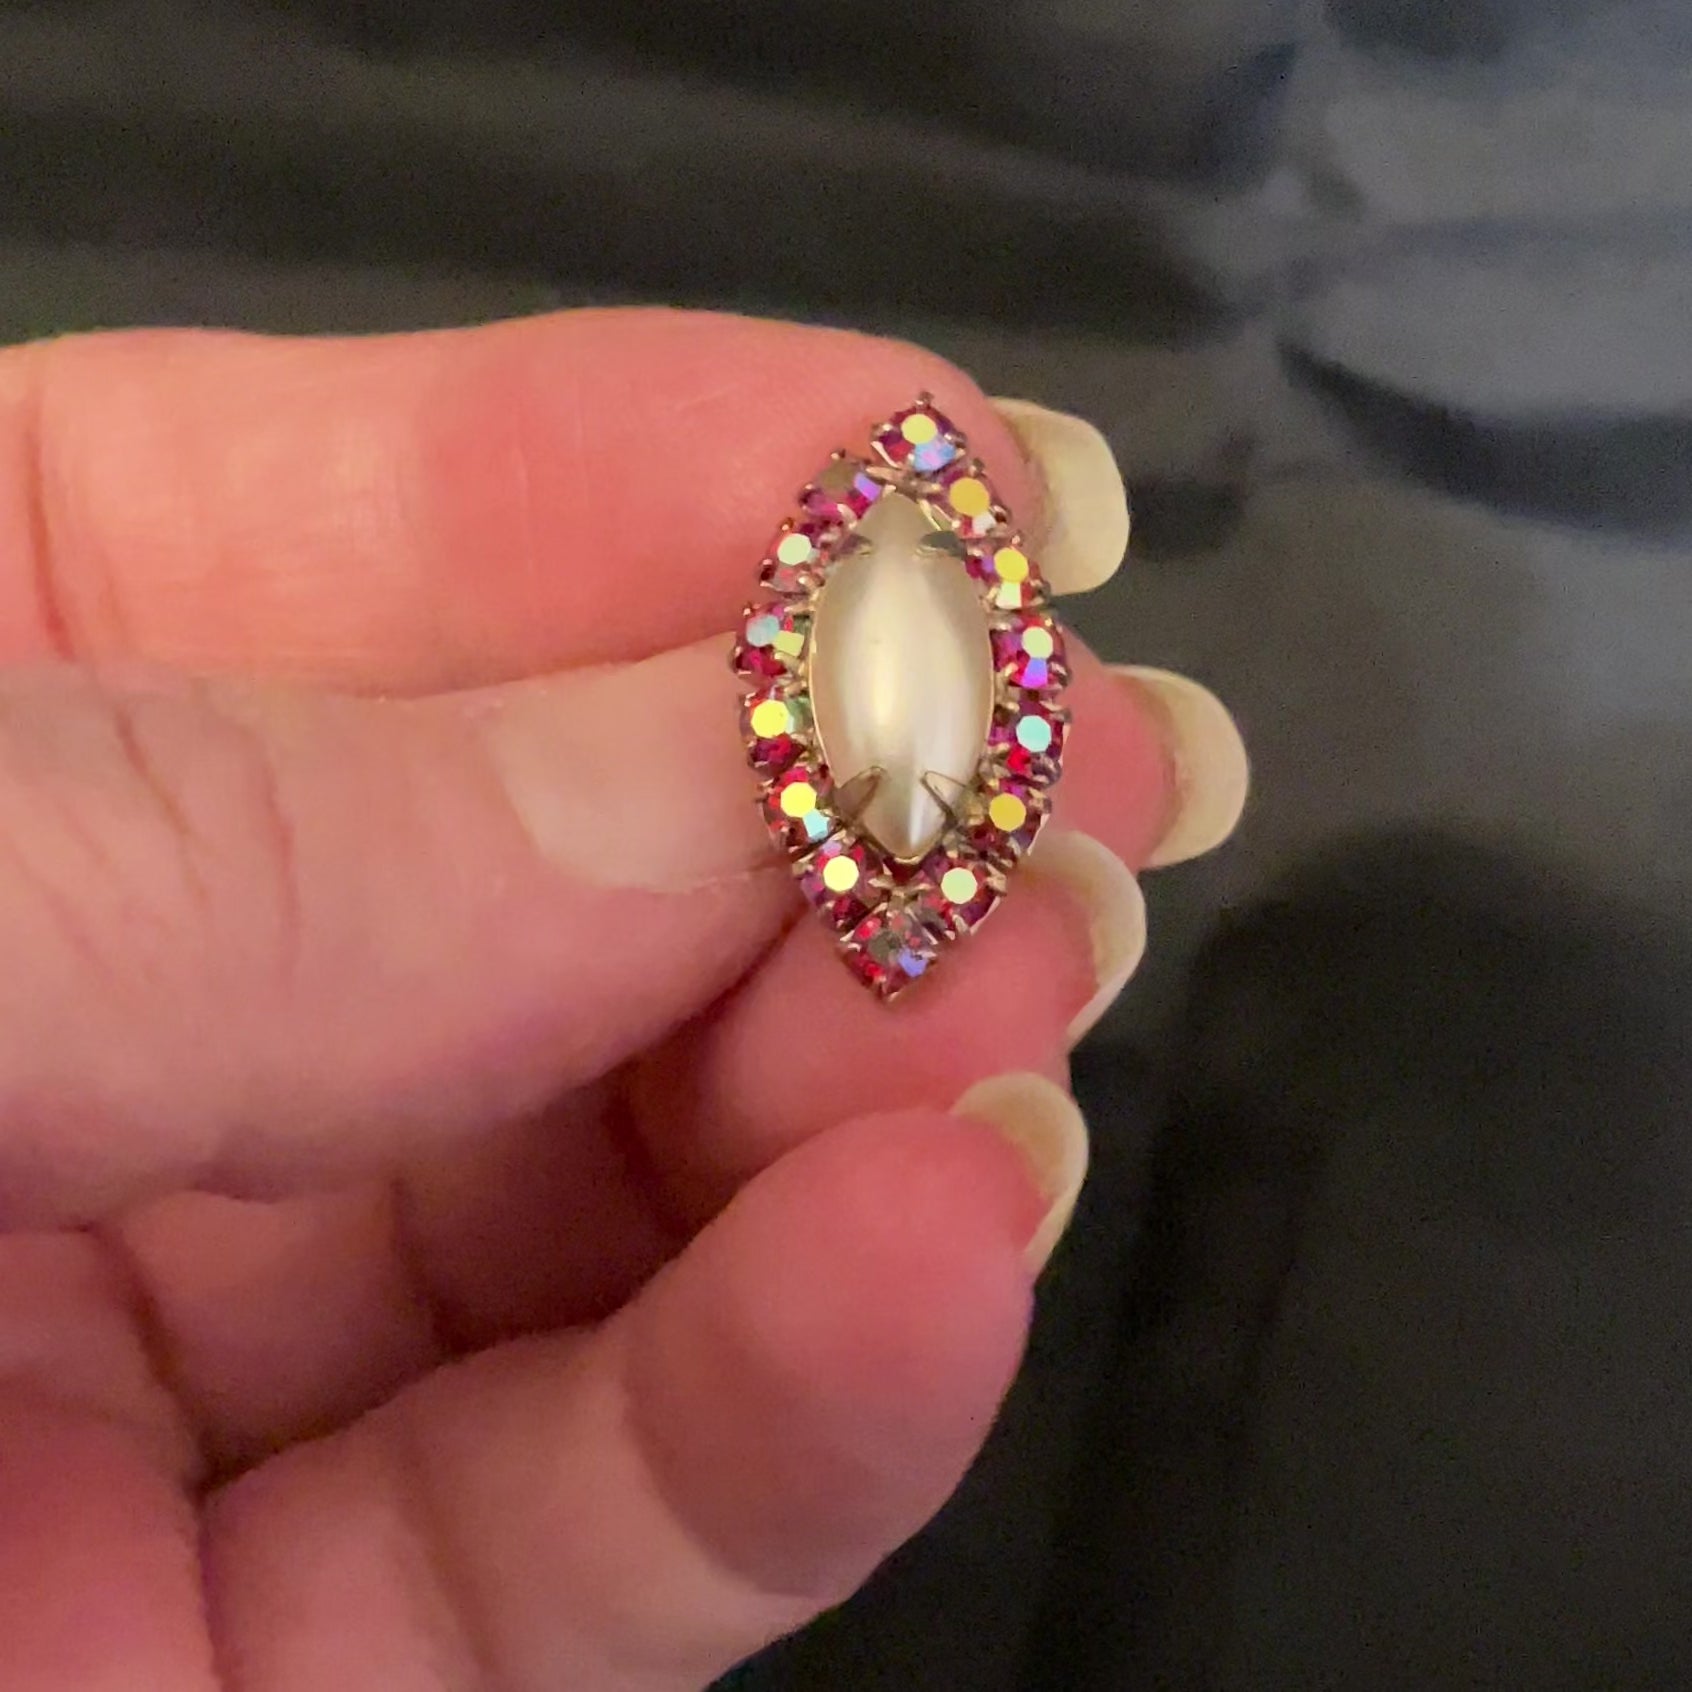 Video of the Mid Century vintage tack pin showing how the AB red rhinestones sparkle in the light.